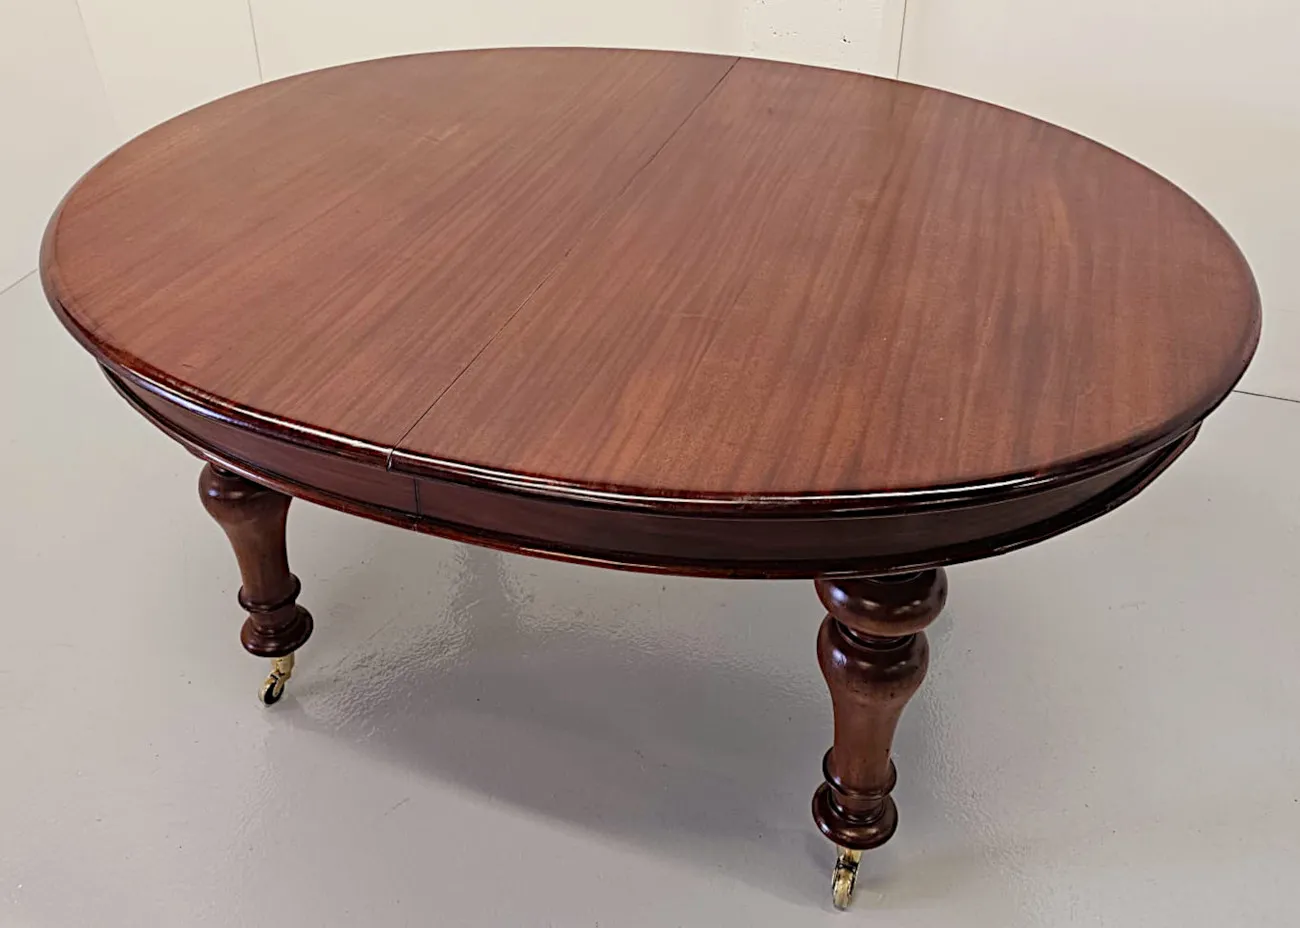  A Gorgeous 19th Century D-End Mahogany Dining Table after Strahan